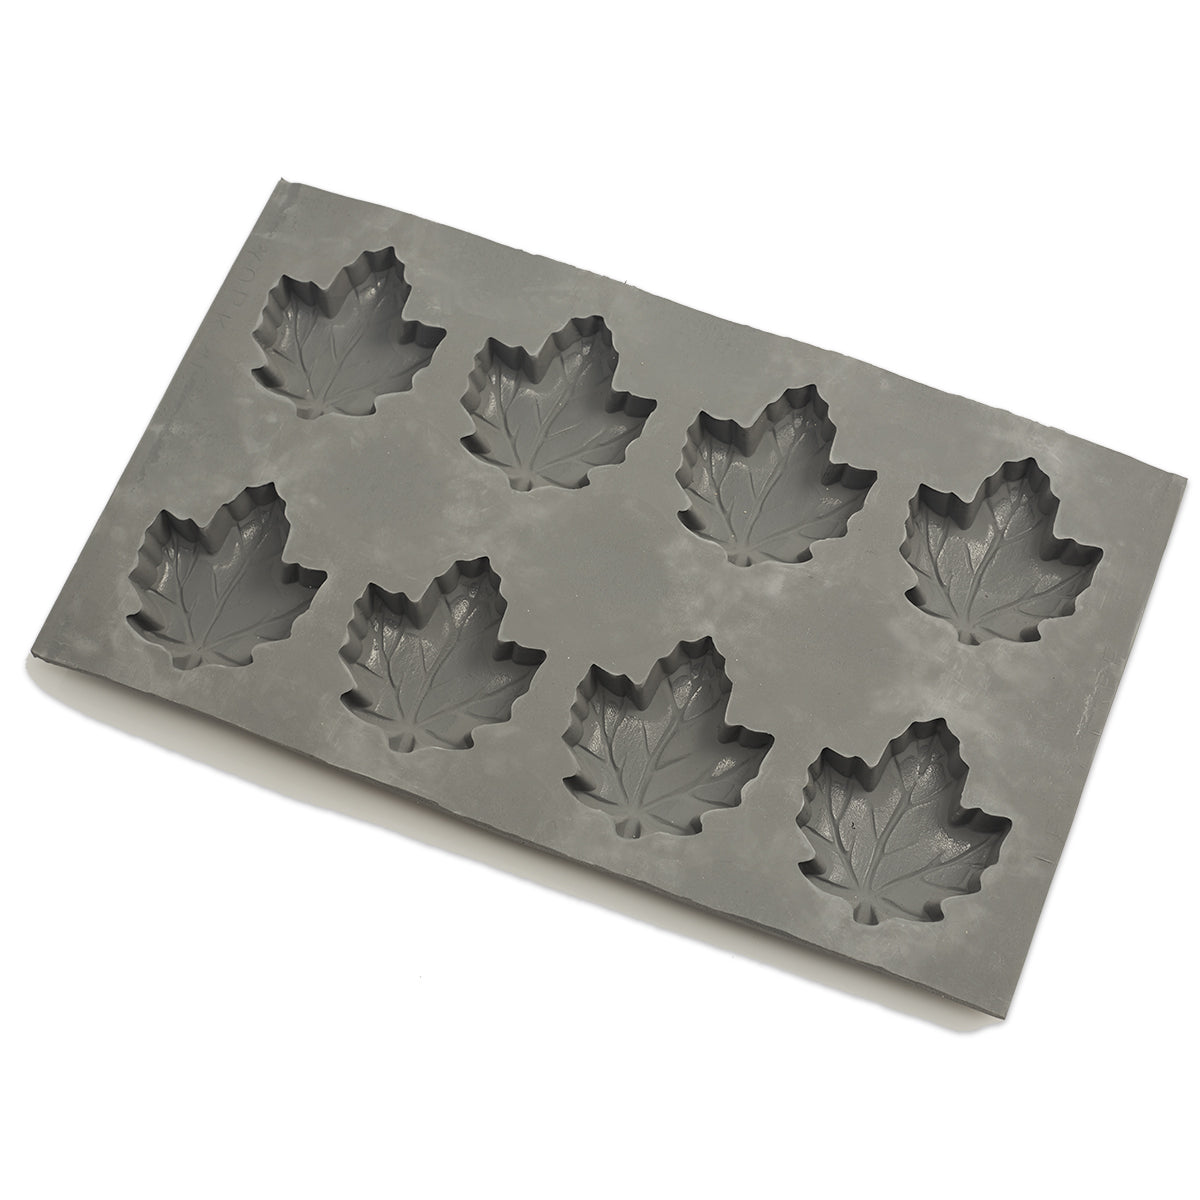 Maple Leaf Maple Candy Mold